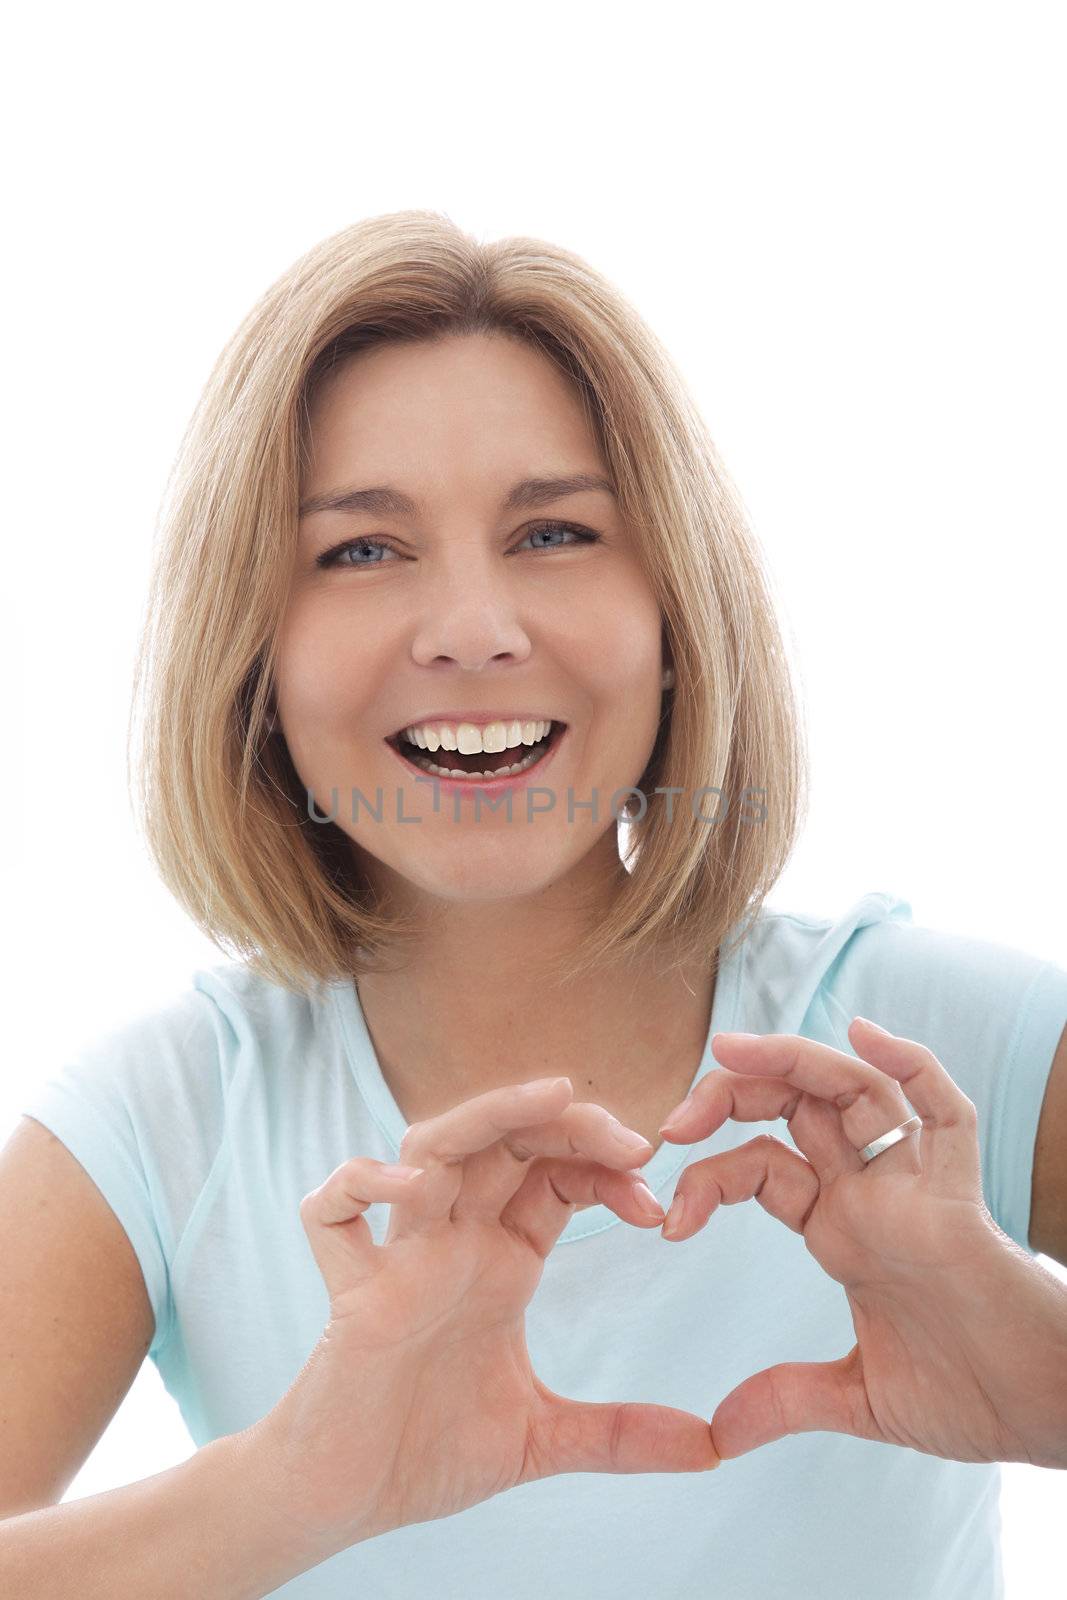 Laughing woman making a heart gesture with her fingers to show her love for something, isolated on white